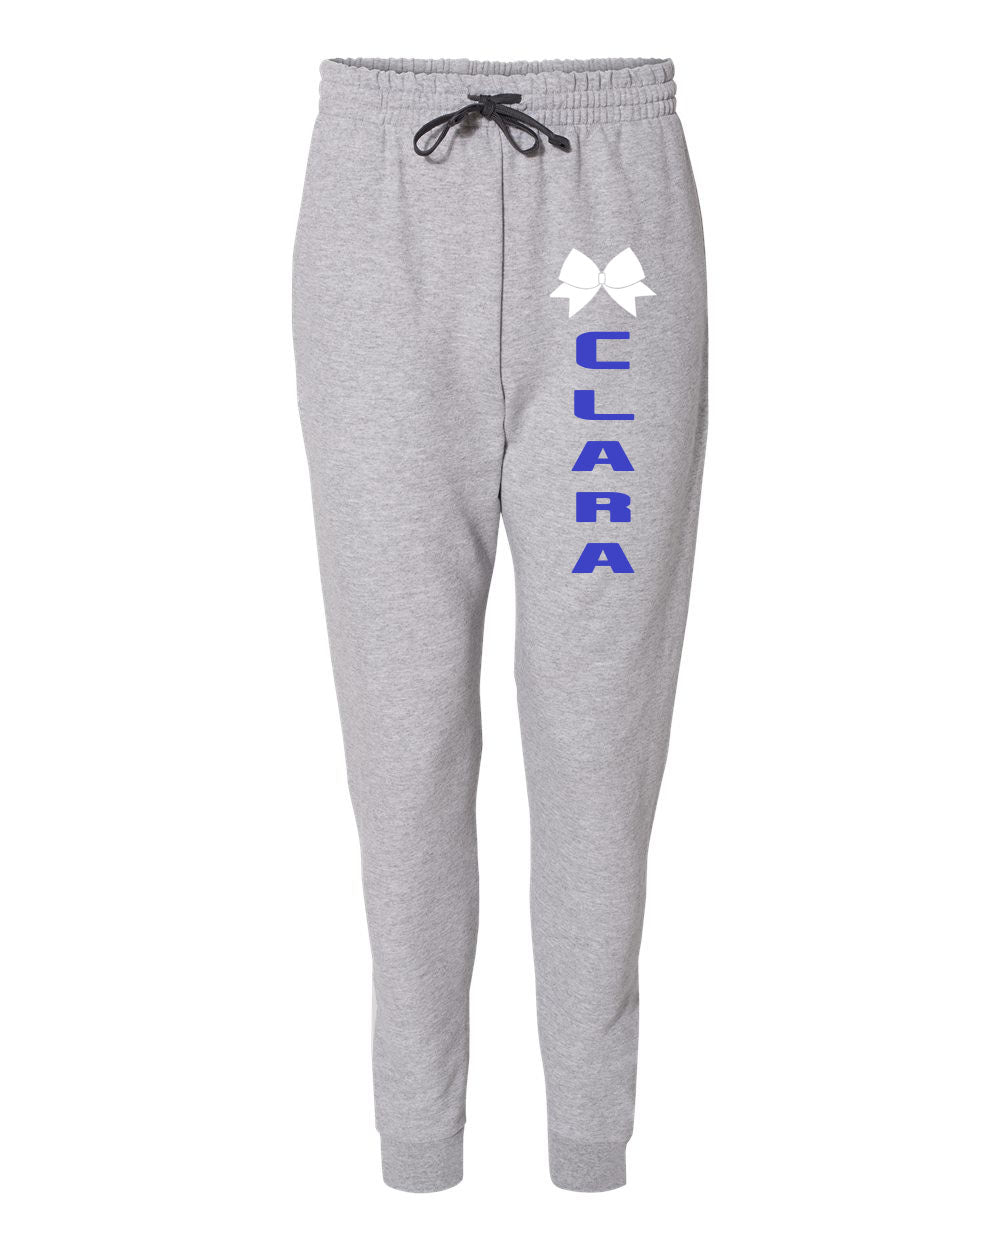 Personalized Cheer Sweatpants